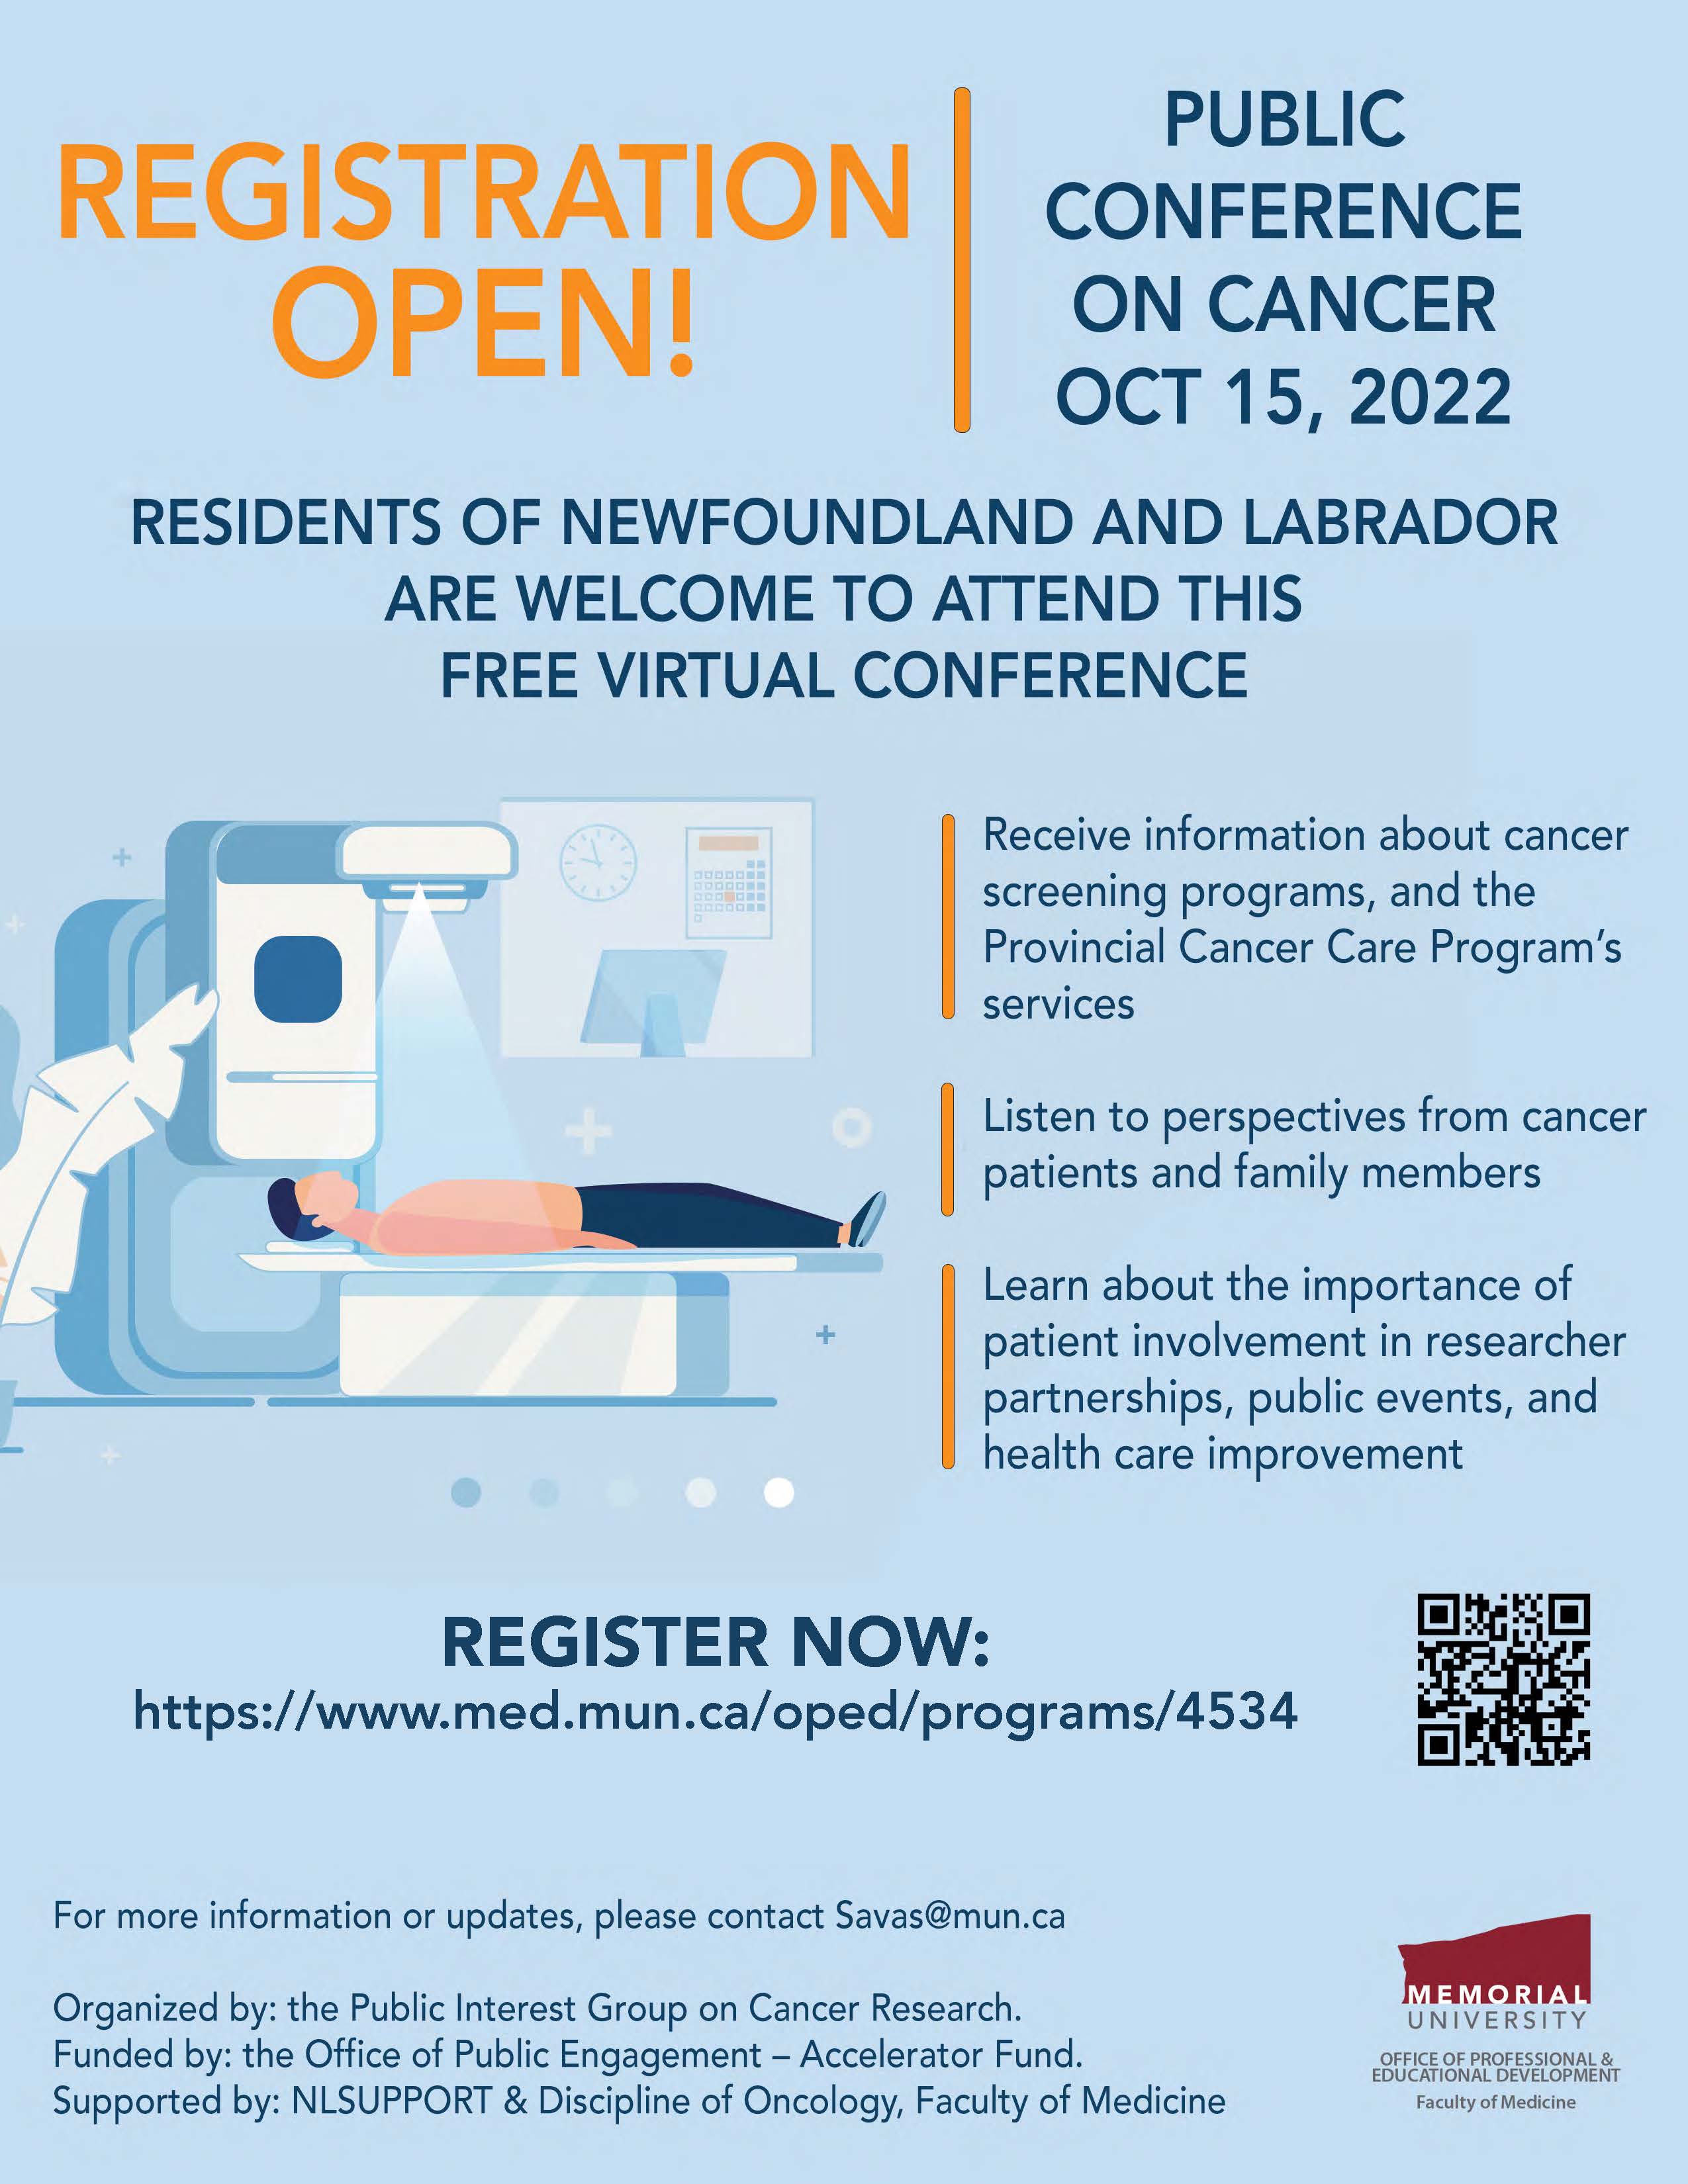 CancerResearch_VirtualConference (003) Aug 23 2022.jpg